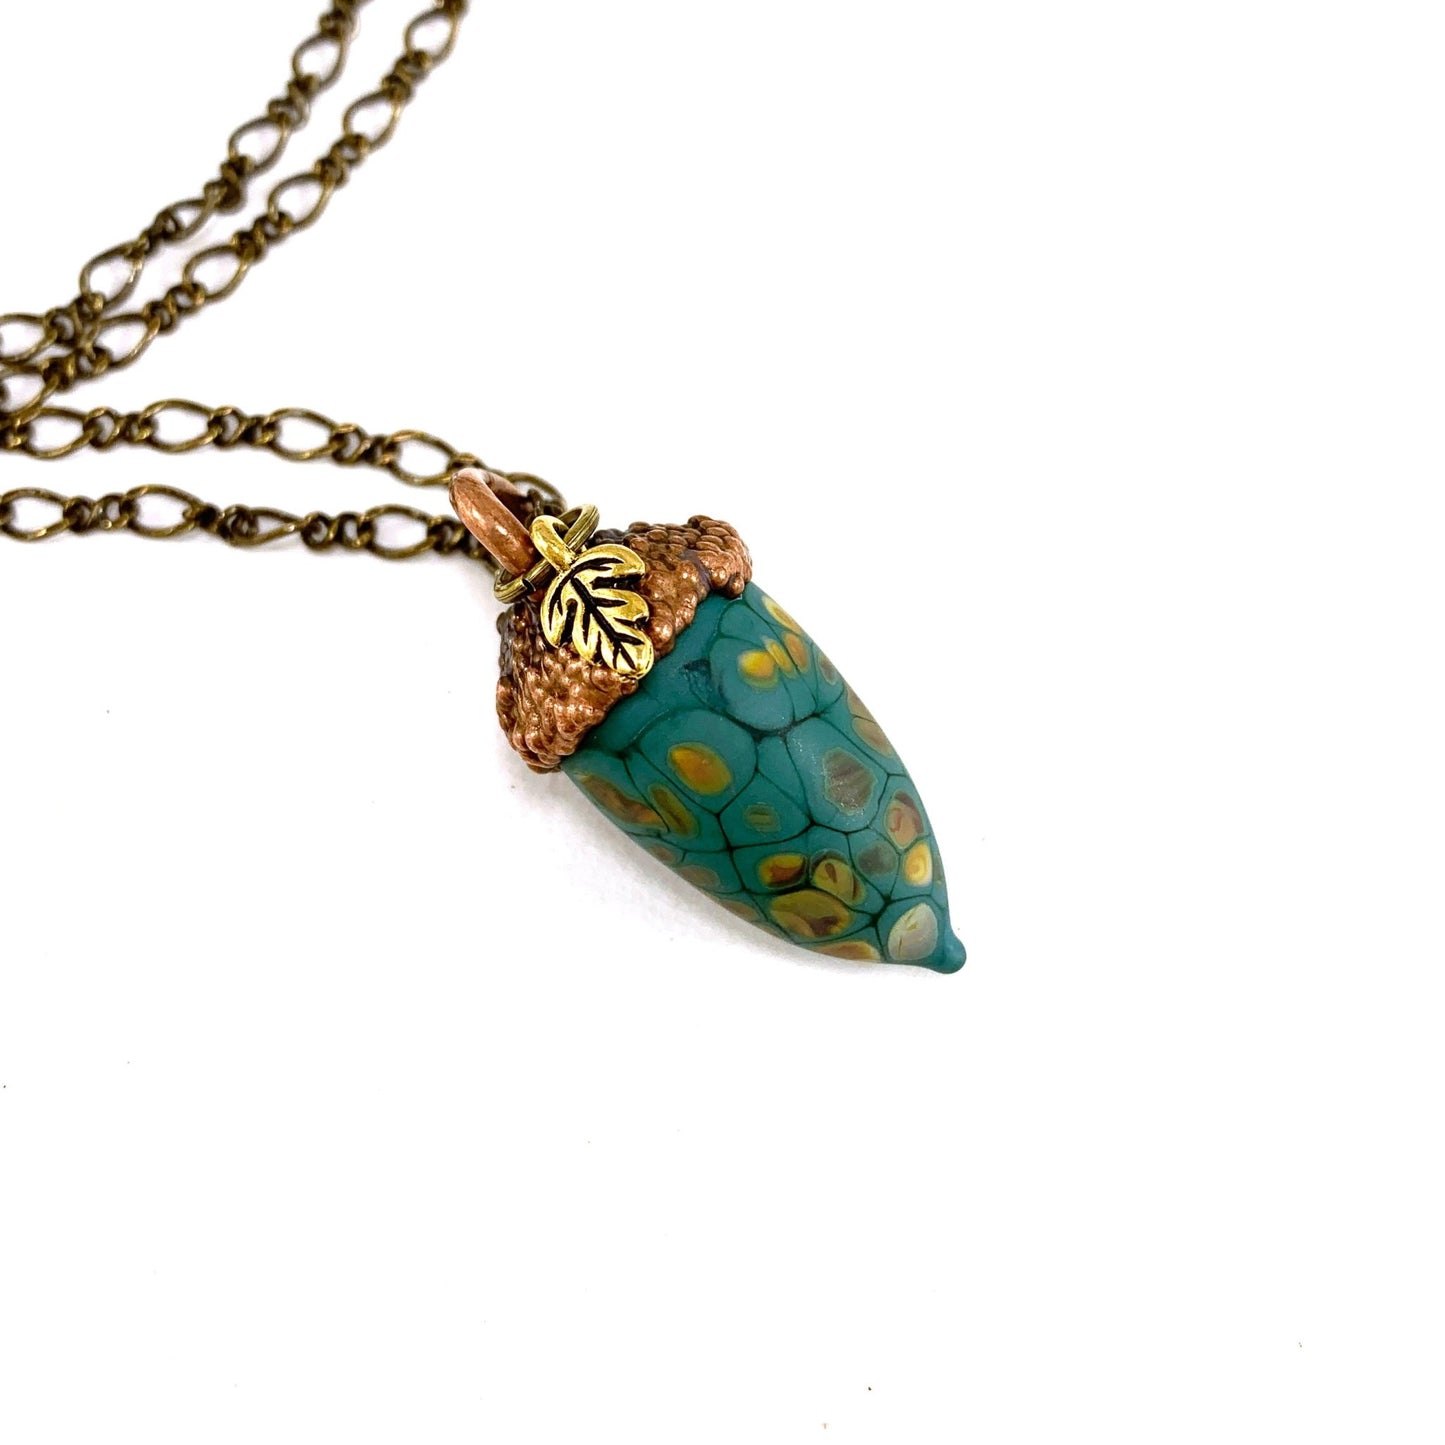 Limited Edition Glass and Copper Acorn Pendant - The Glass Acorn